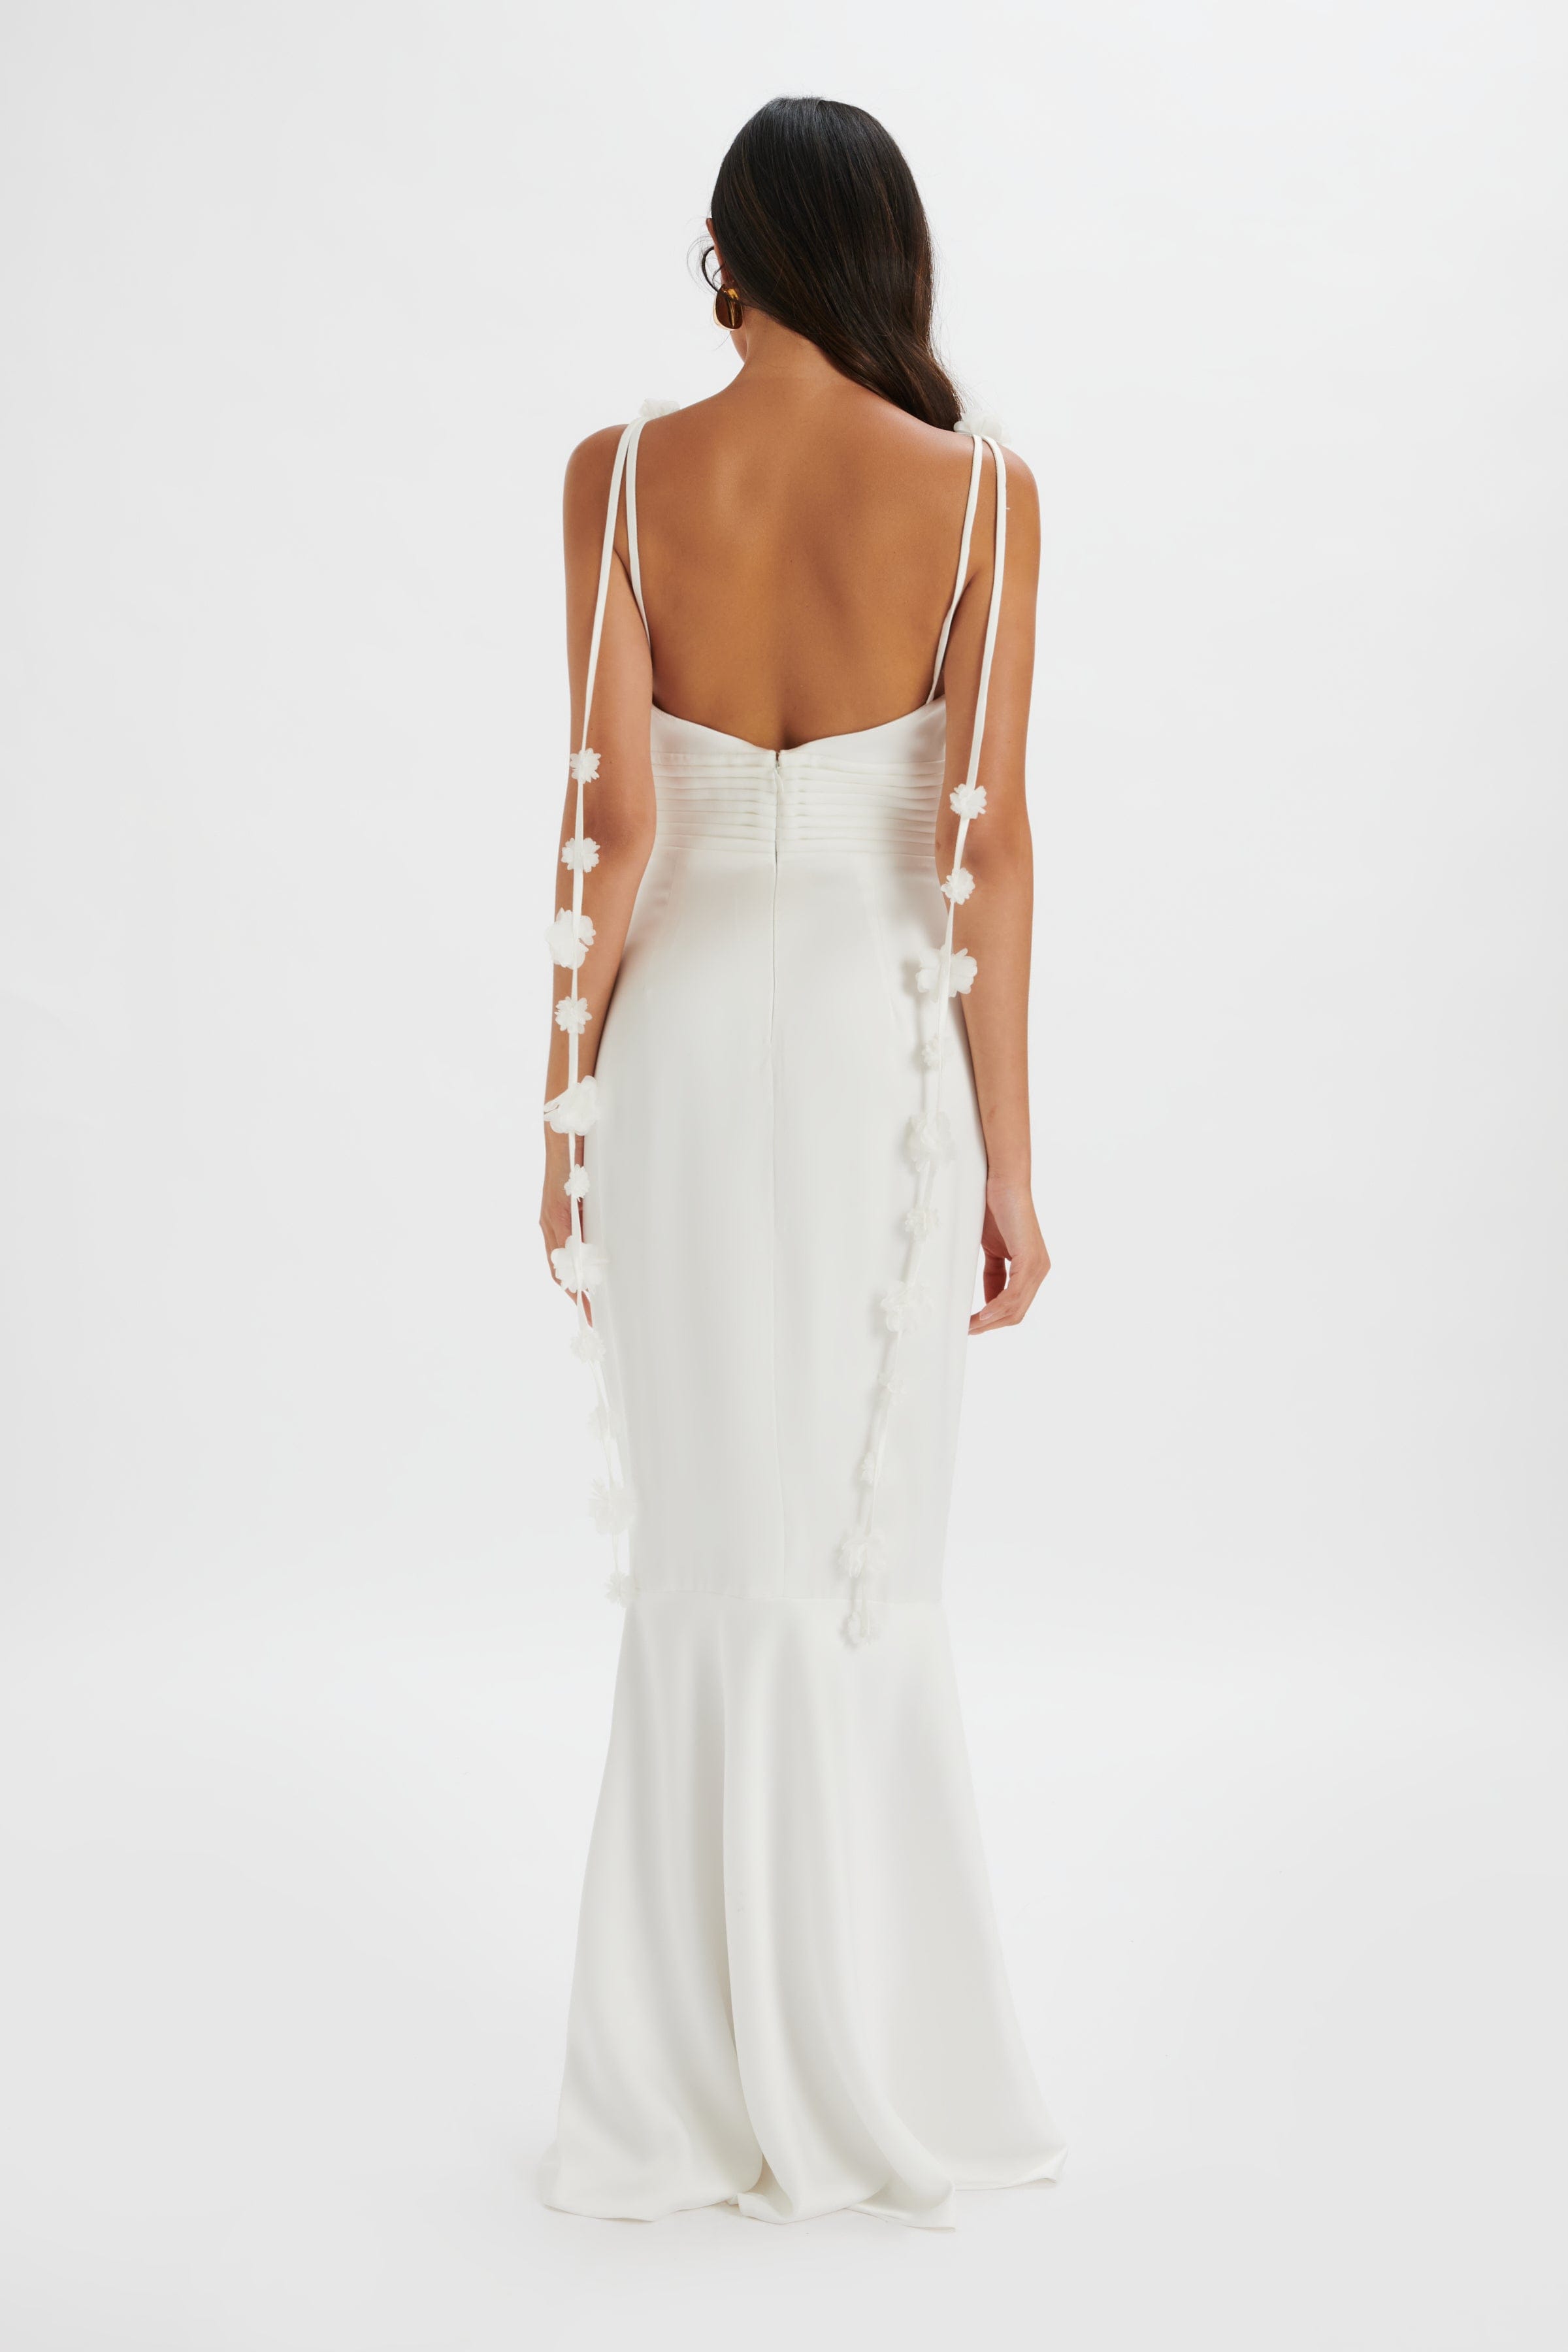 NOVIE Floral Strap Satin Fit and Flare Maxi Dress in Ivory